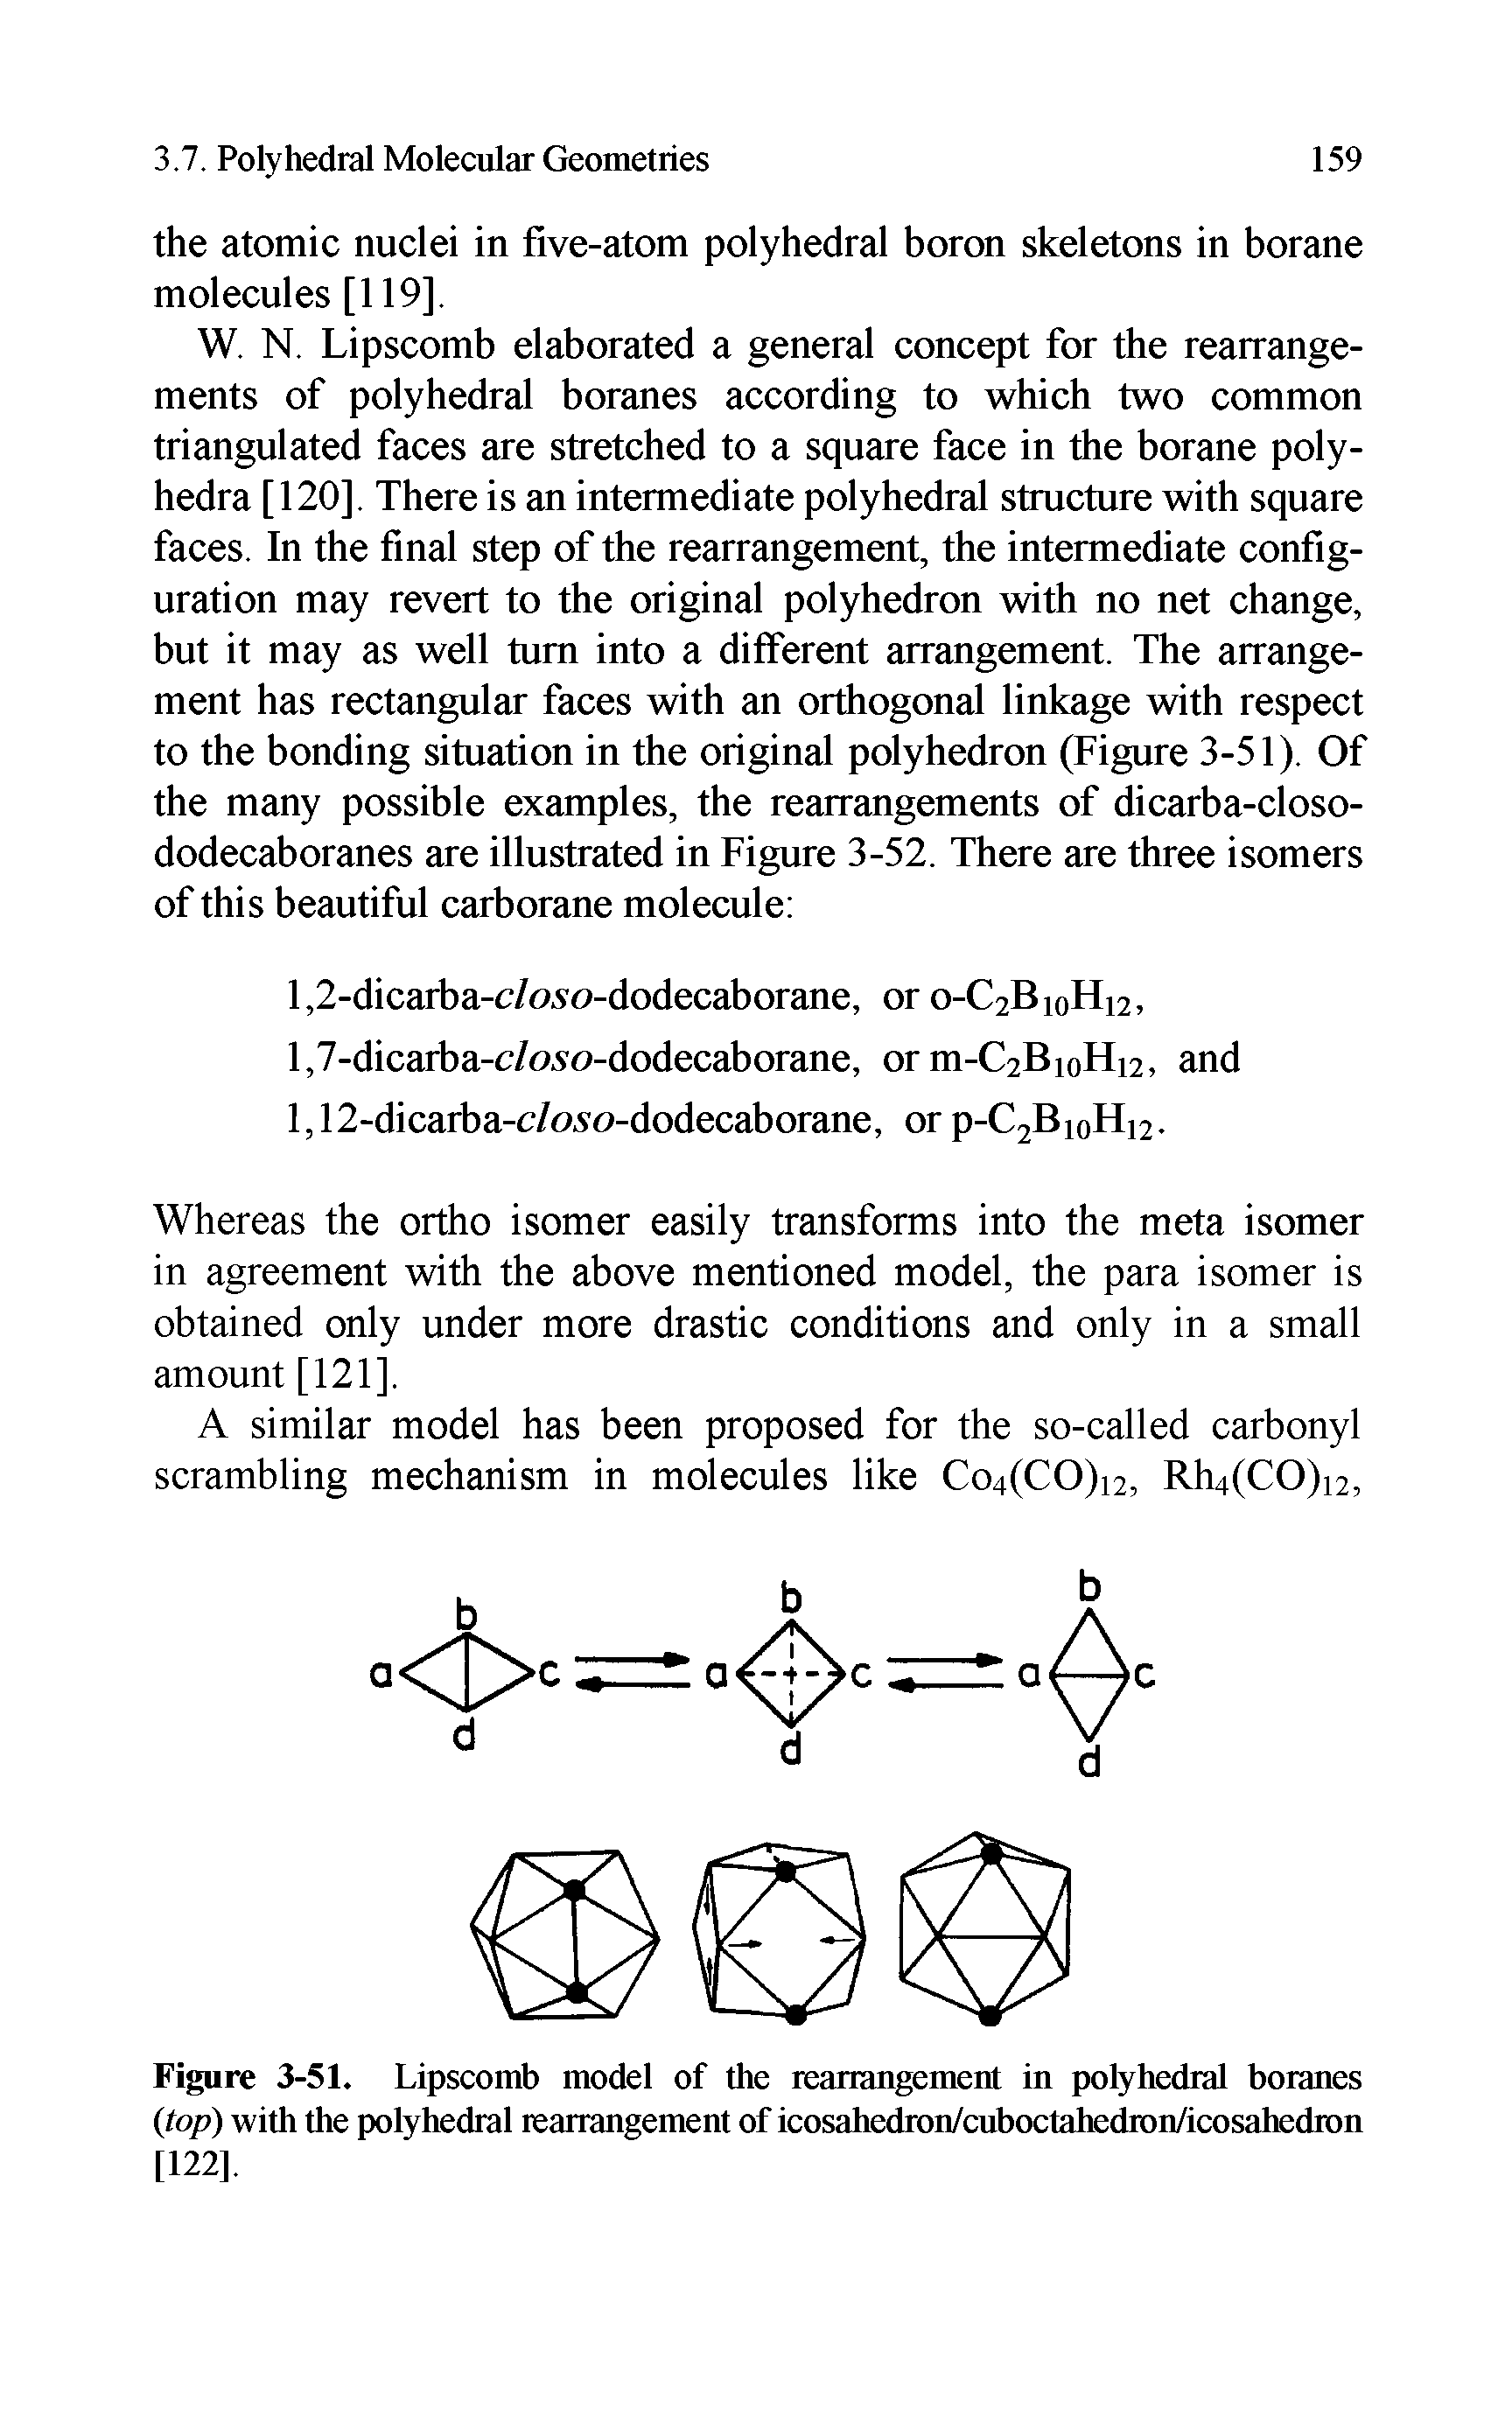 Figure 3-51. Lipscomb model of the rearrangement in polyhedral boranes top) with the polyhedral rearrangement of icosahedron/cuboctahedron/icosahedron [122],...